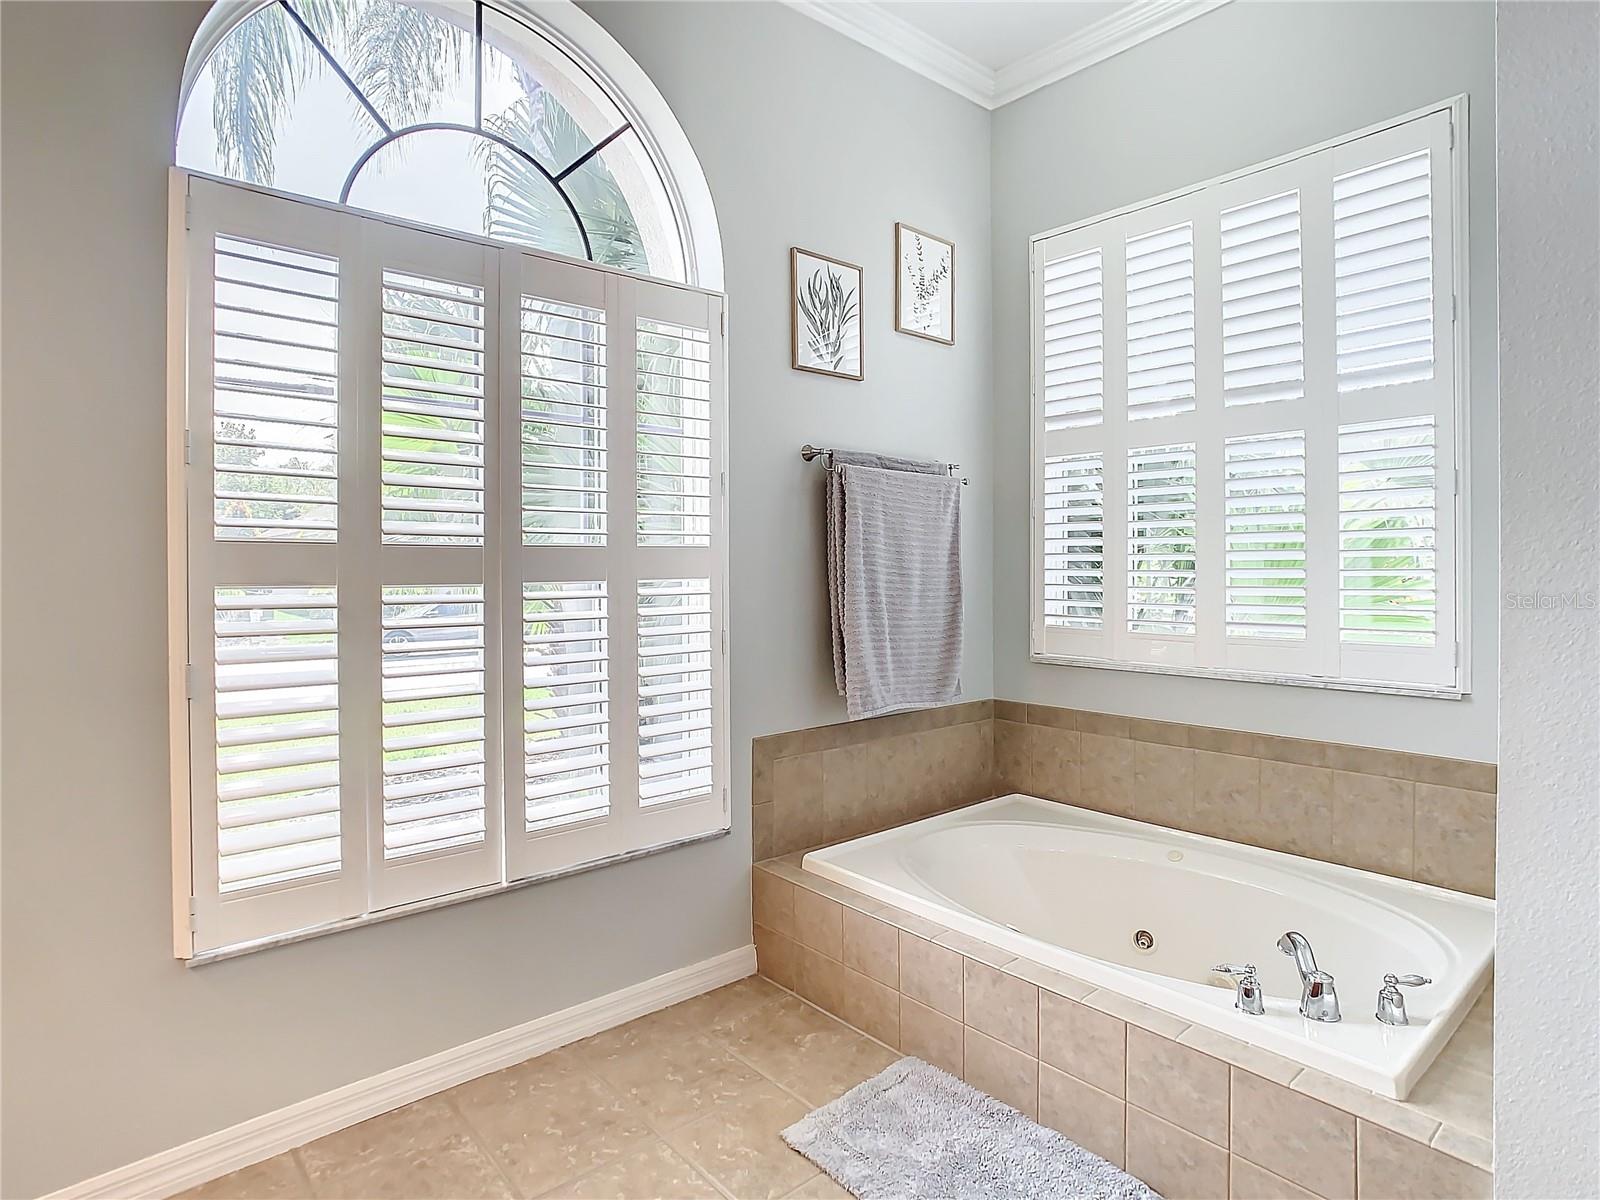 Plantaion shutters and jacuzzi tub in Master bath